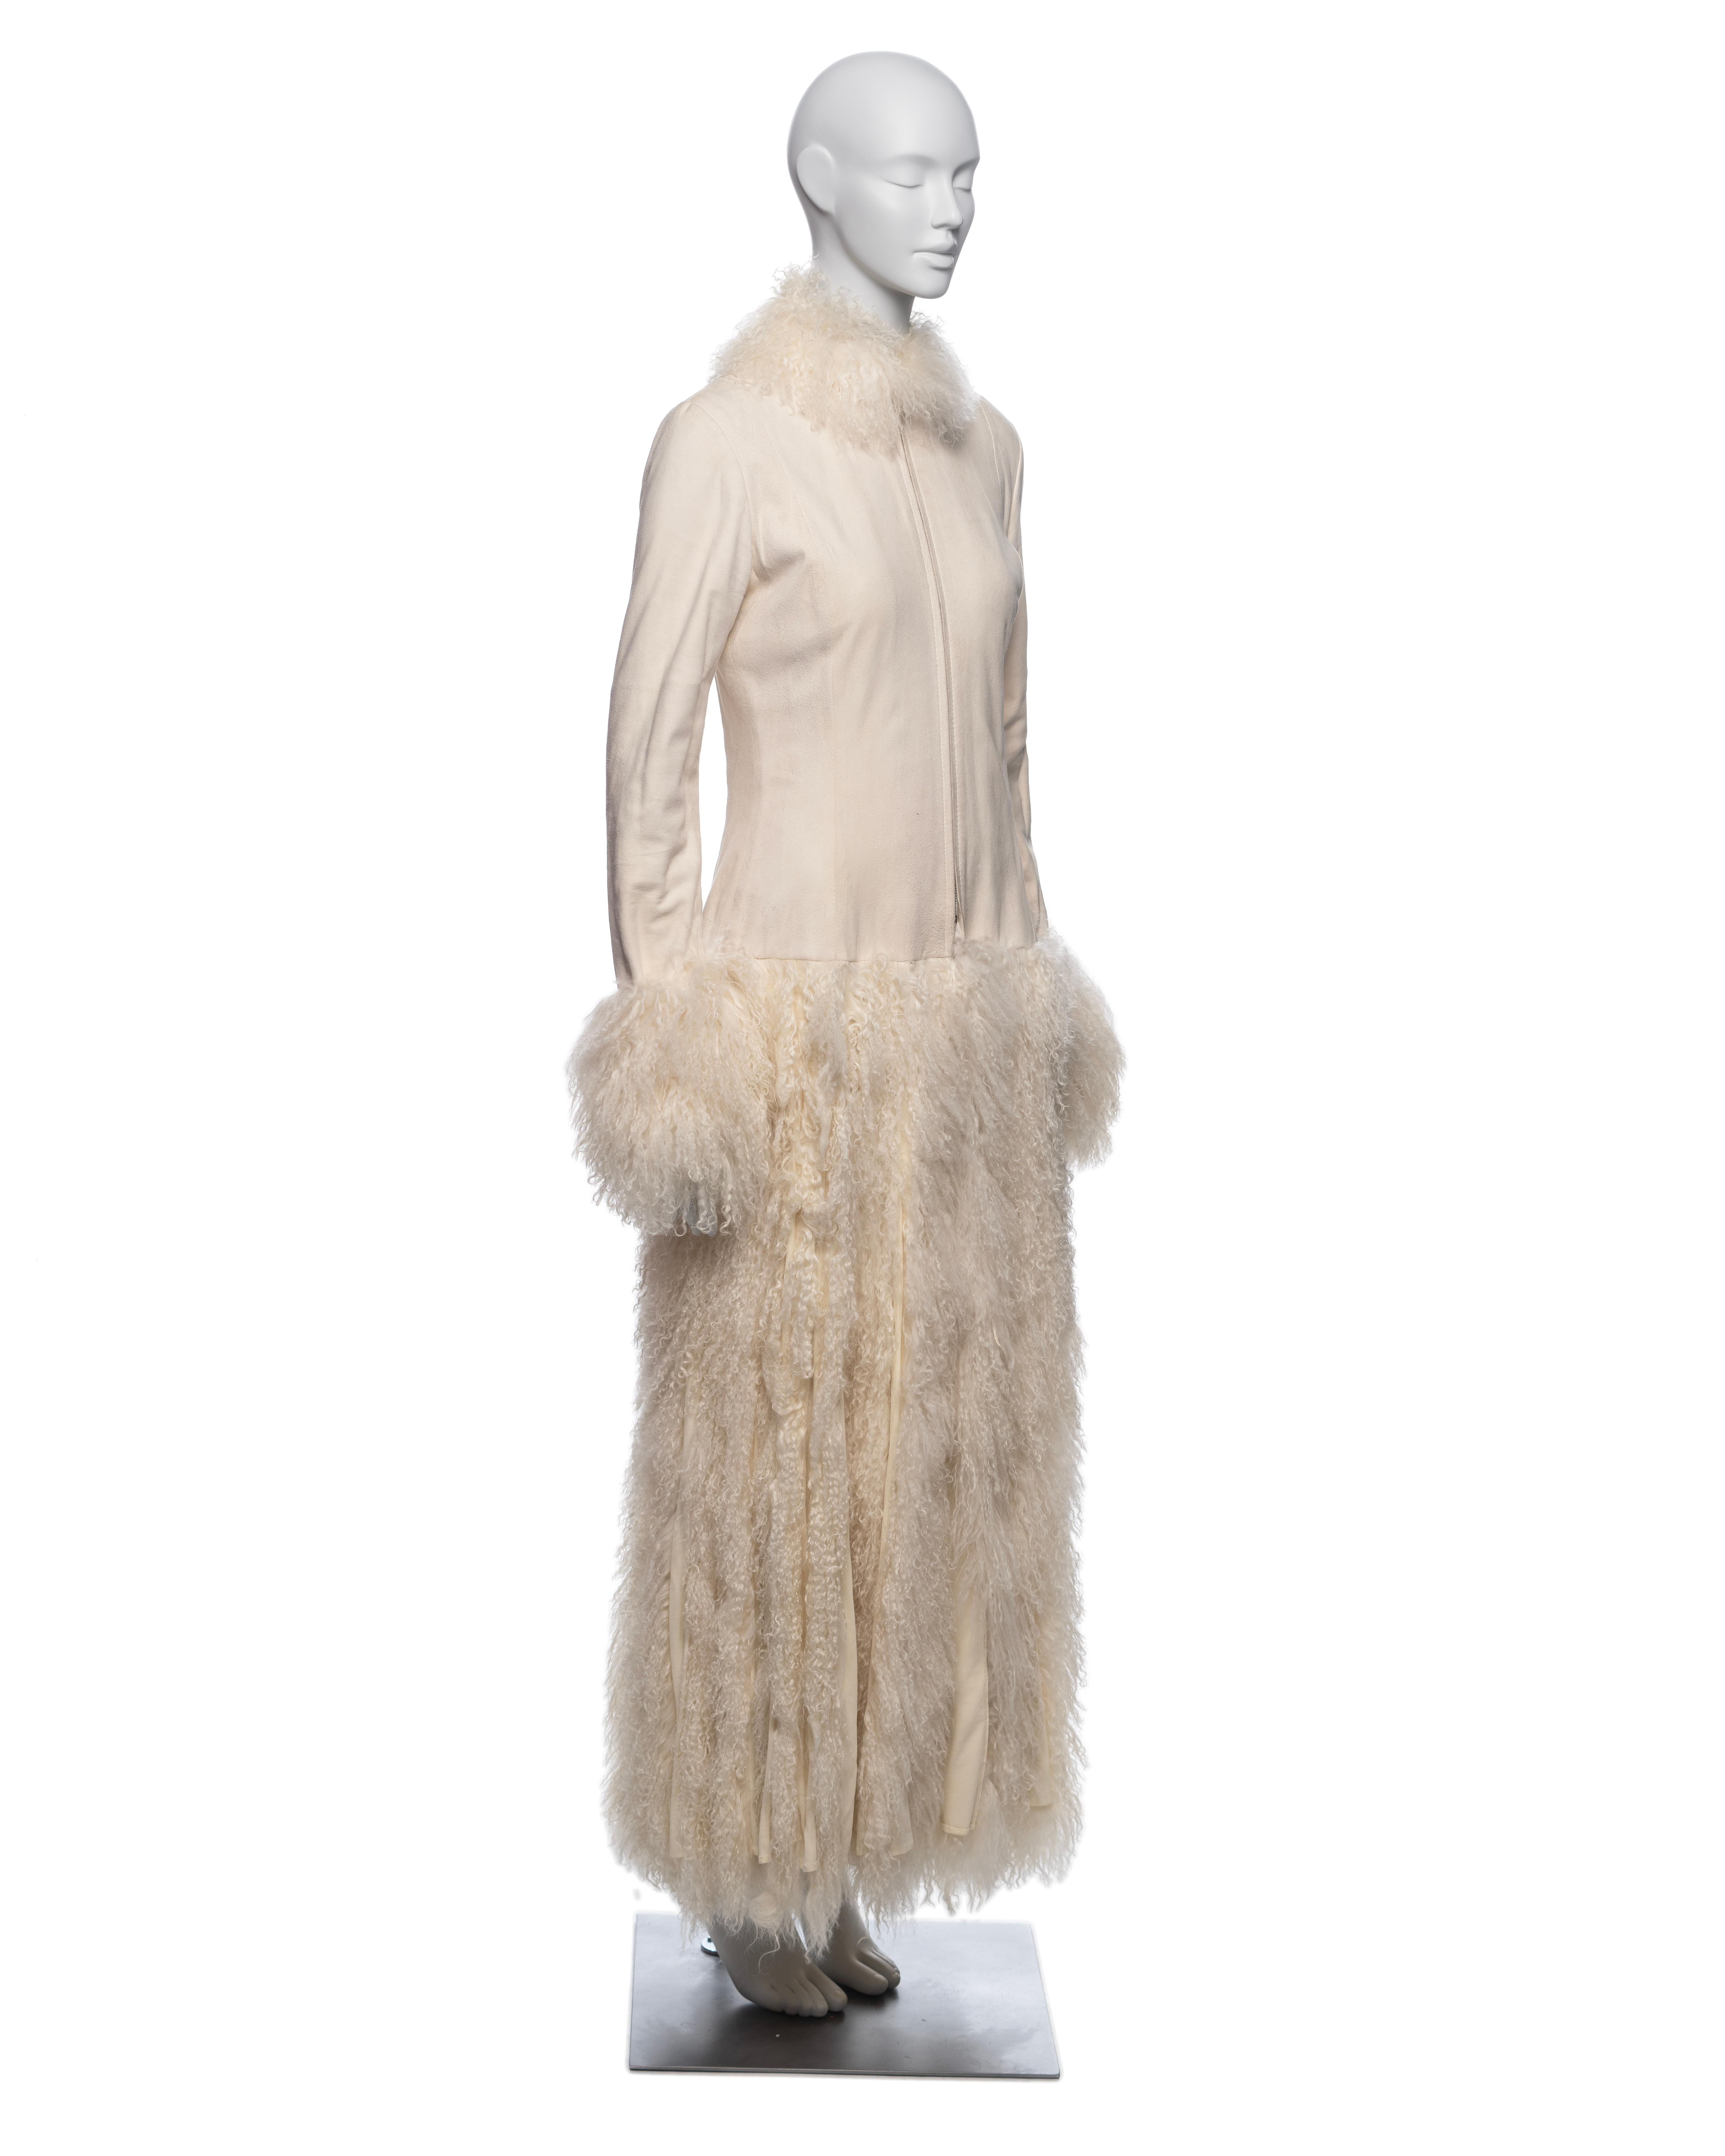 Jean Paul Gaultier White Mongolian Lamb Fur and Leather Coat Dress, FW 2006 For Sale 4